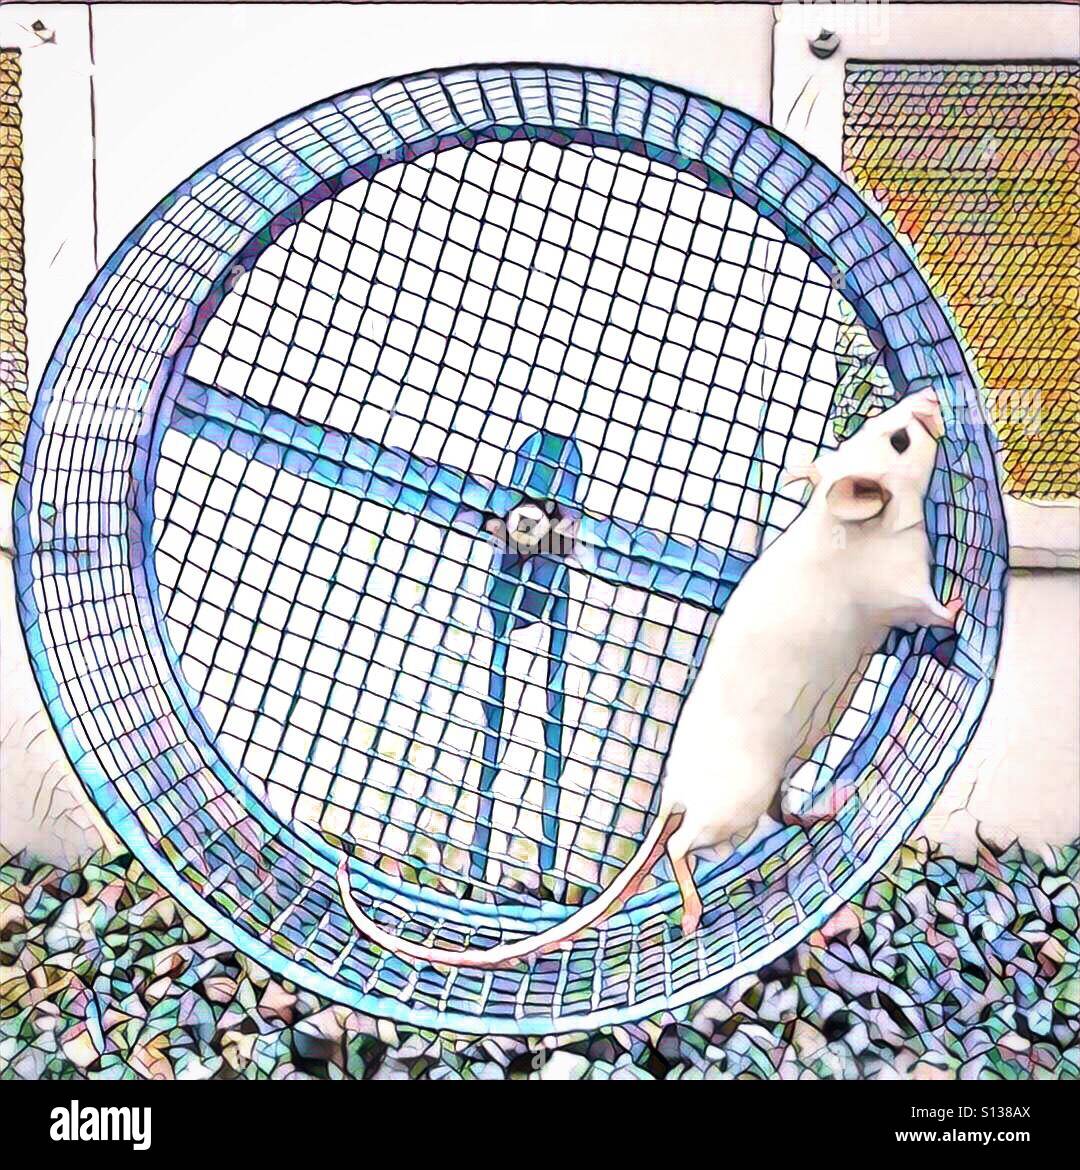 A digital art image of a white rat running in a wheel Stock Photo